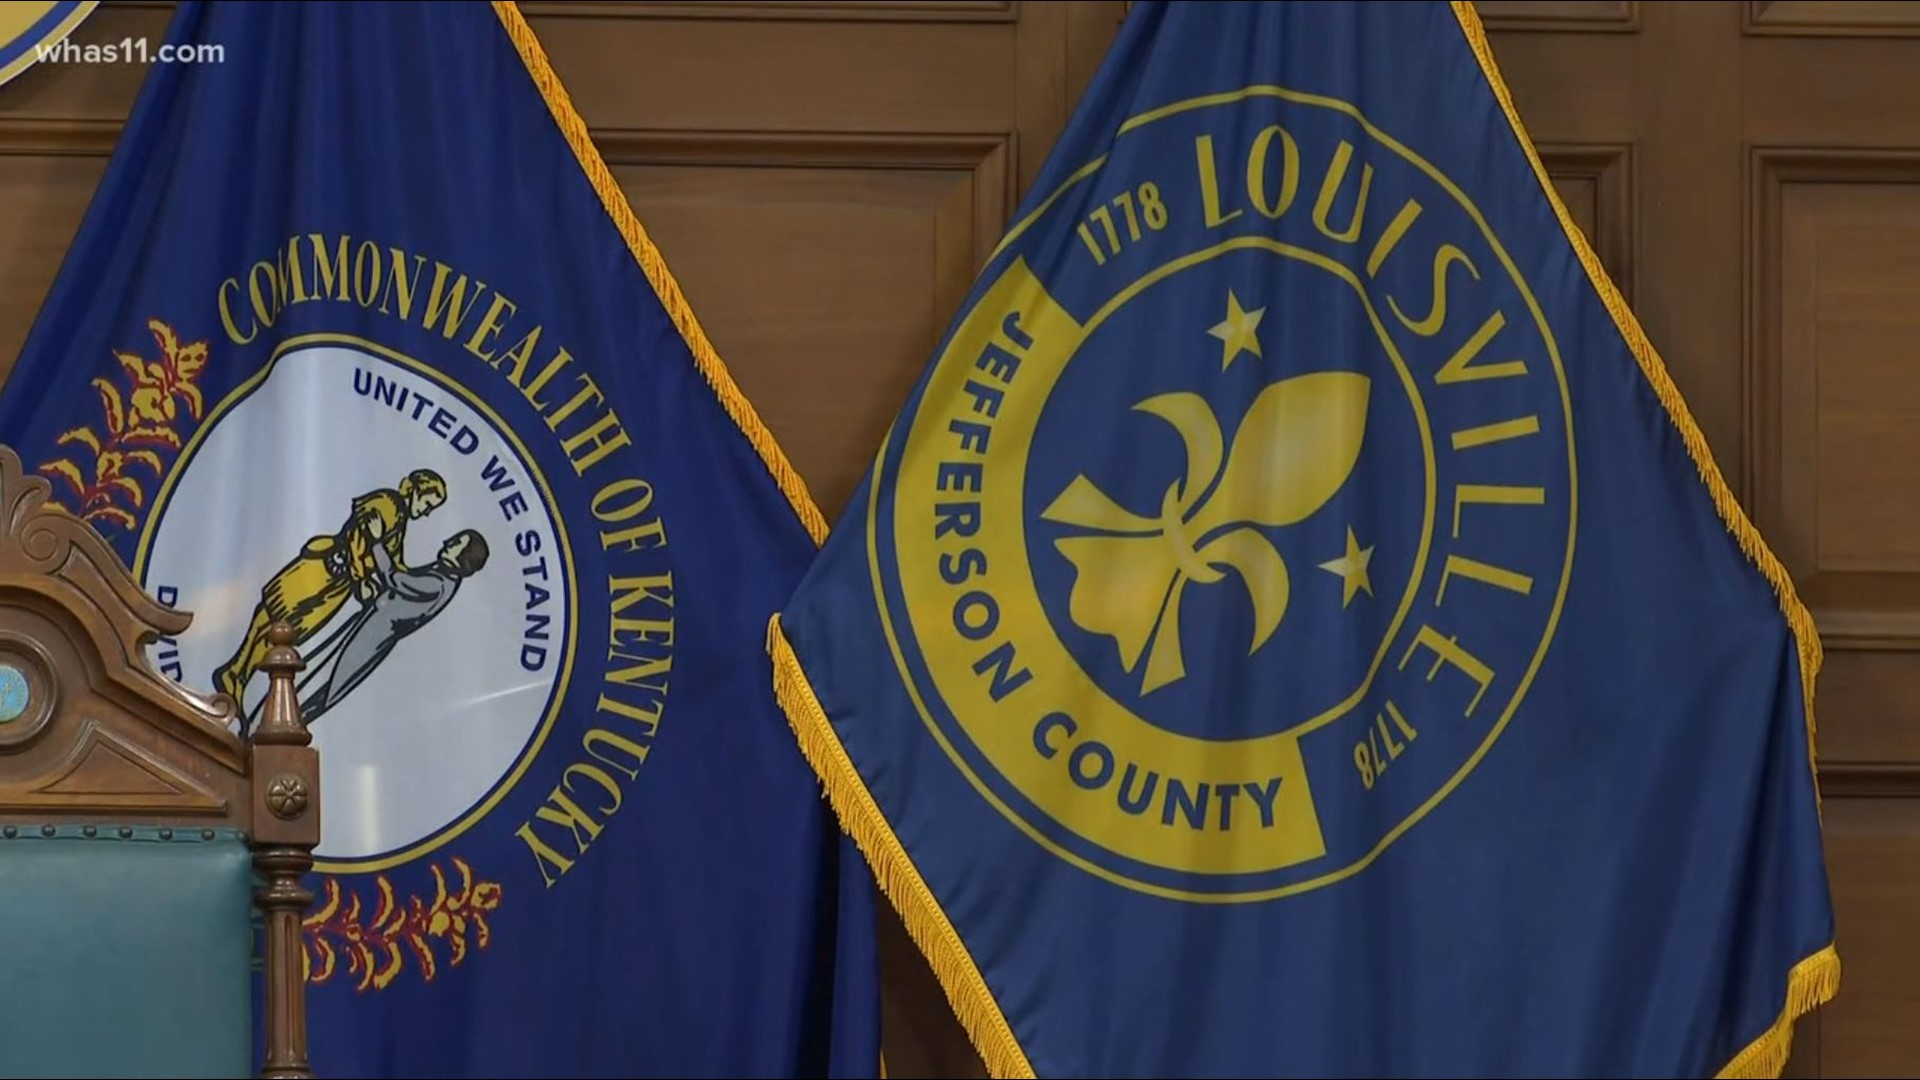 An ordinance working through Metro Council is expected to get the green light this week and bring more equity to Louisville. The sponsor, Councilwoman Keisha Dorsey.